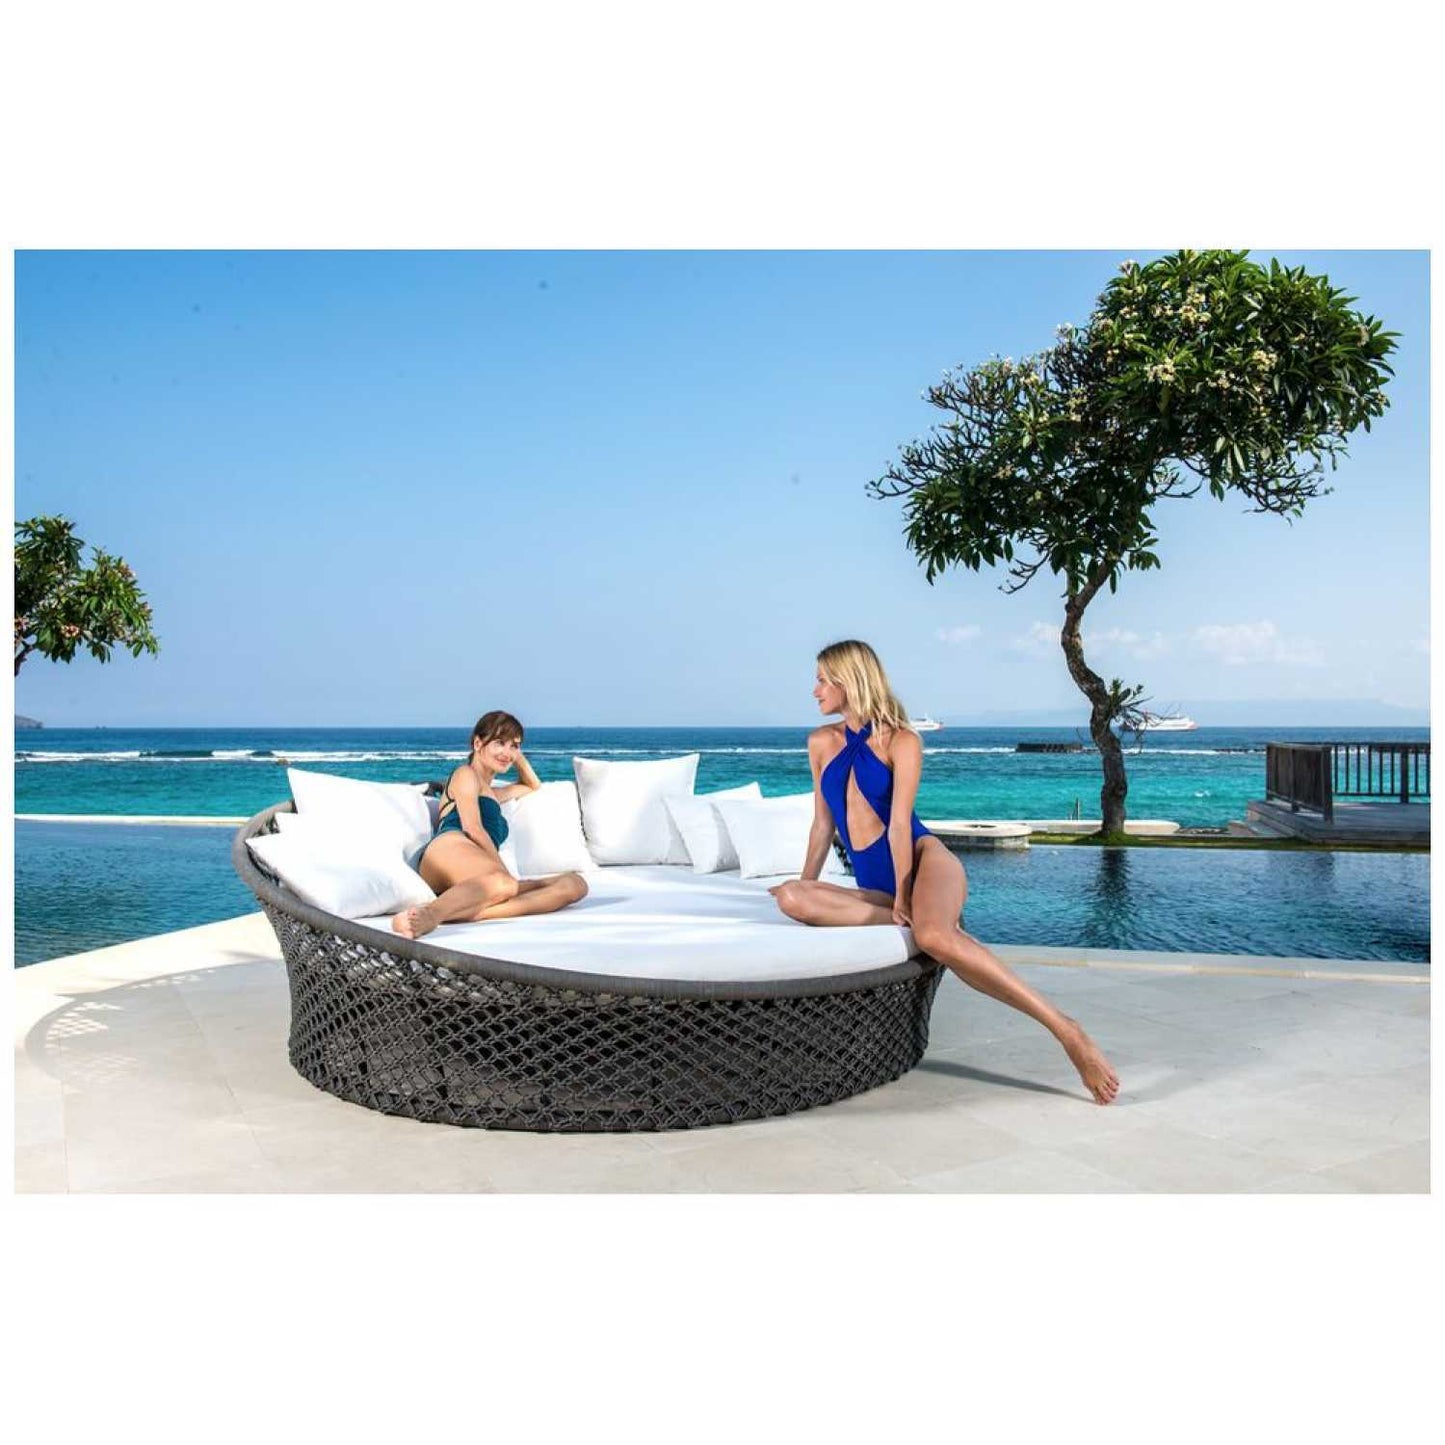 Kona Daybed - PadioLiving - Kona Daybed - Outdoor Daybed - PadioLiving